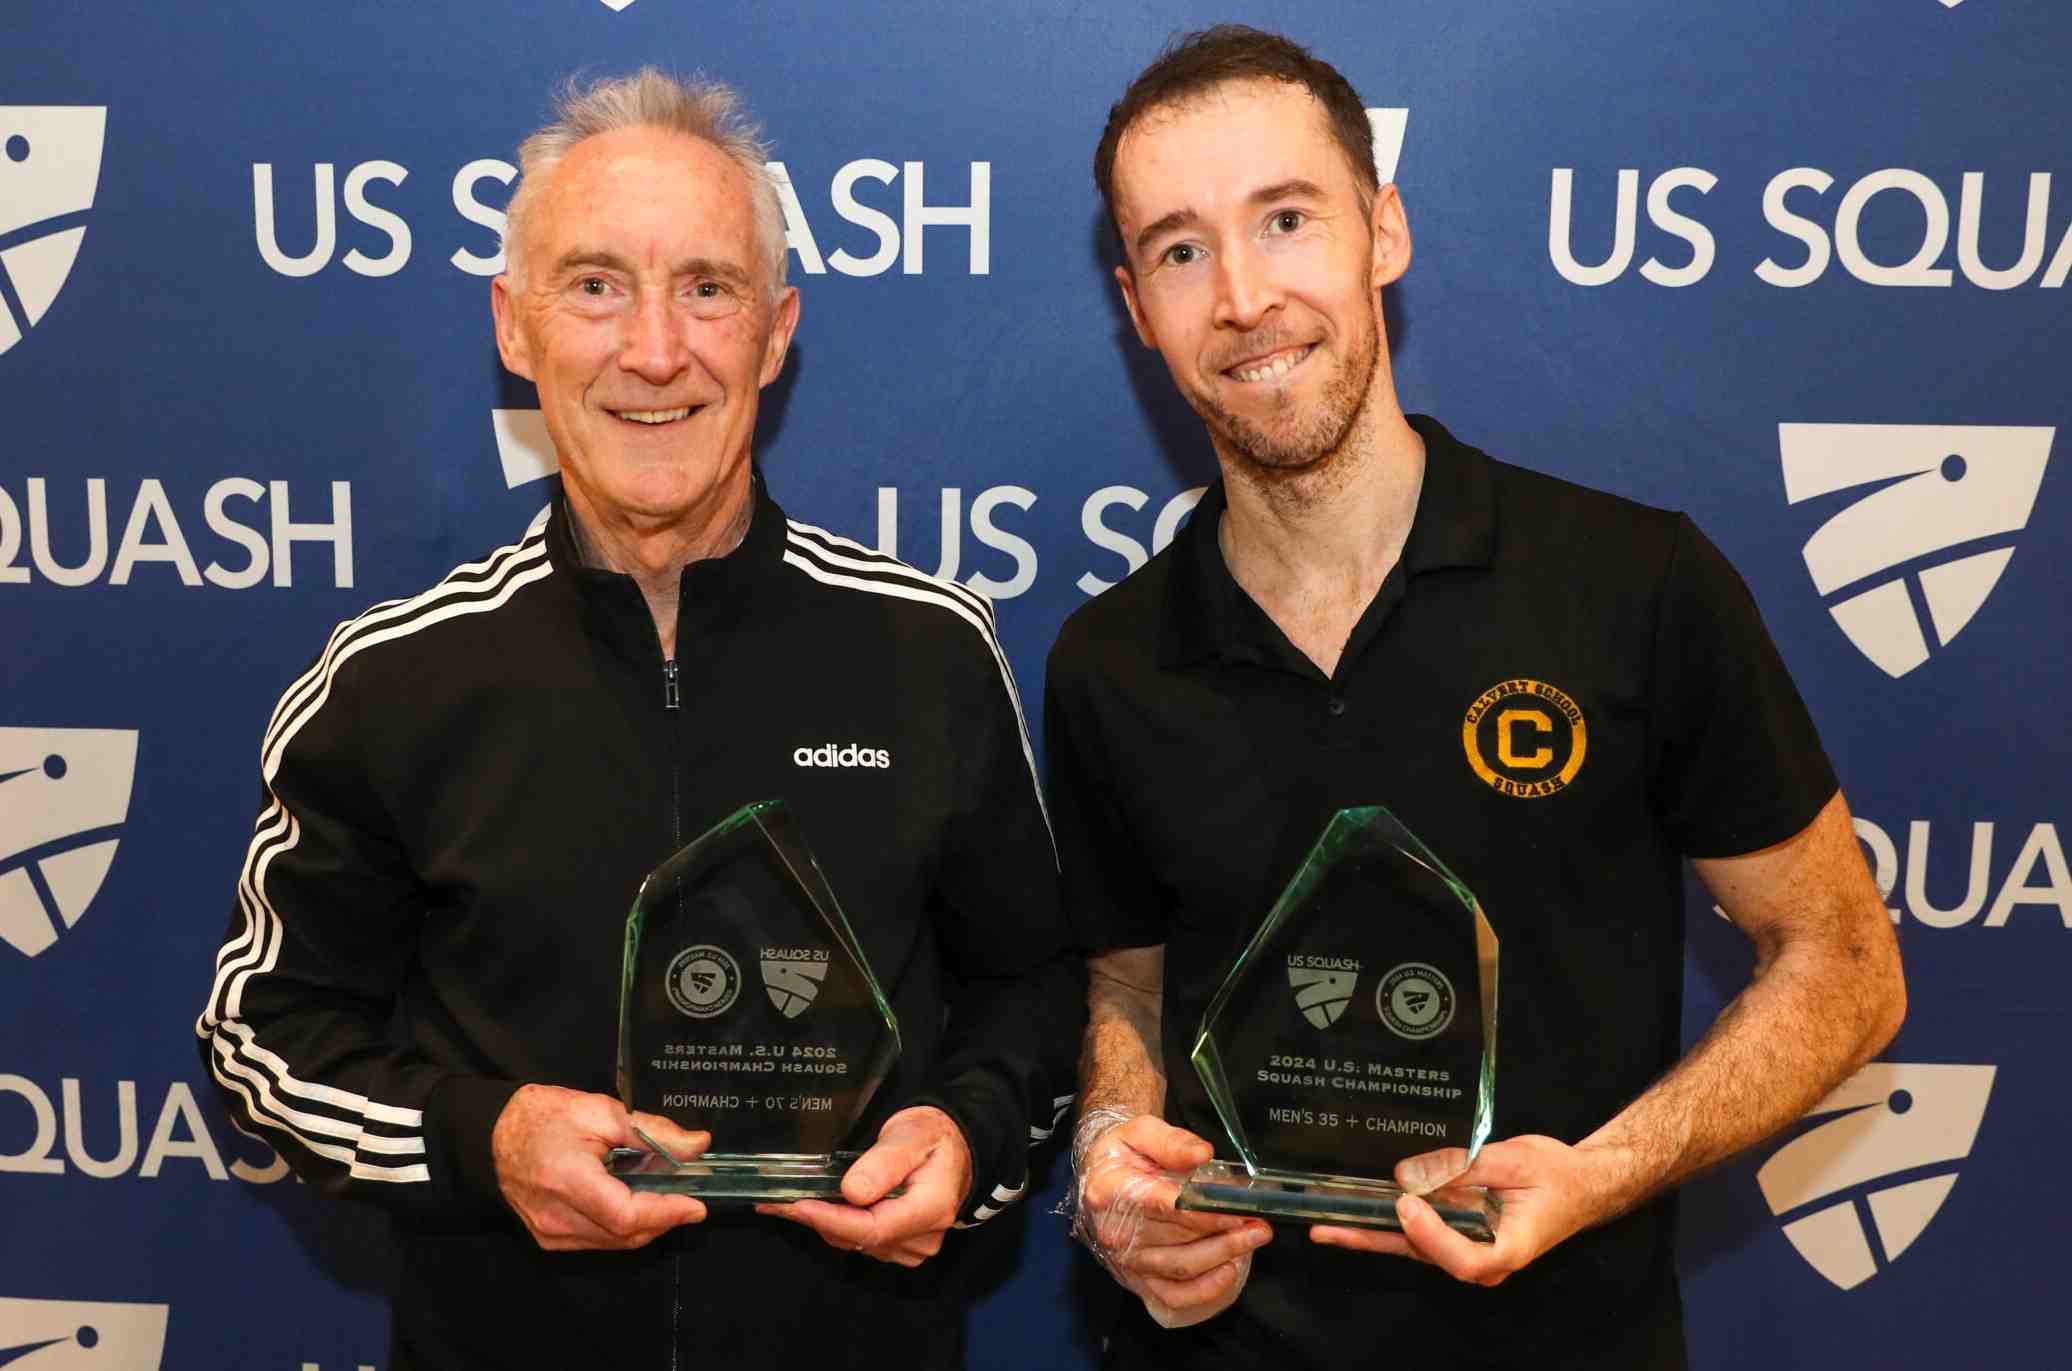 Father Thomas and Son Patrick become US Masters Champions